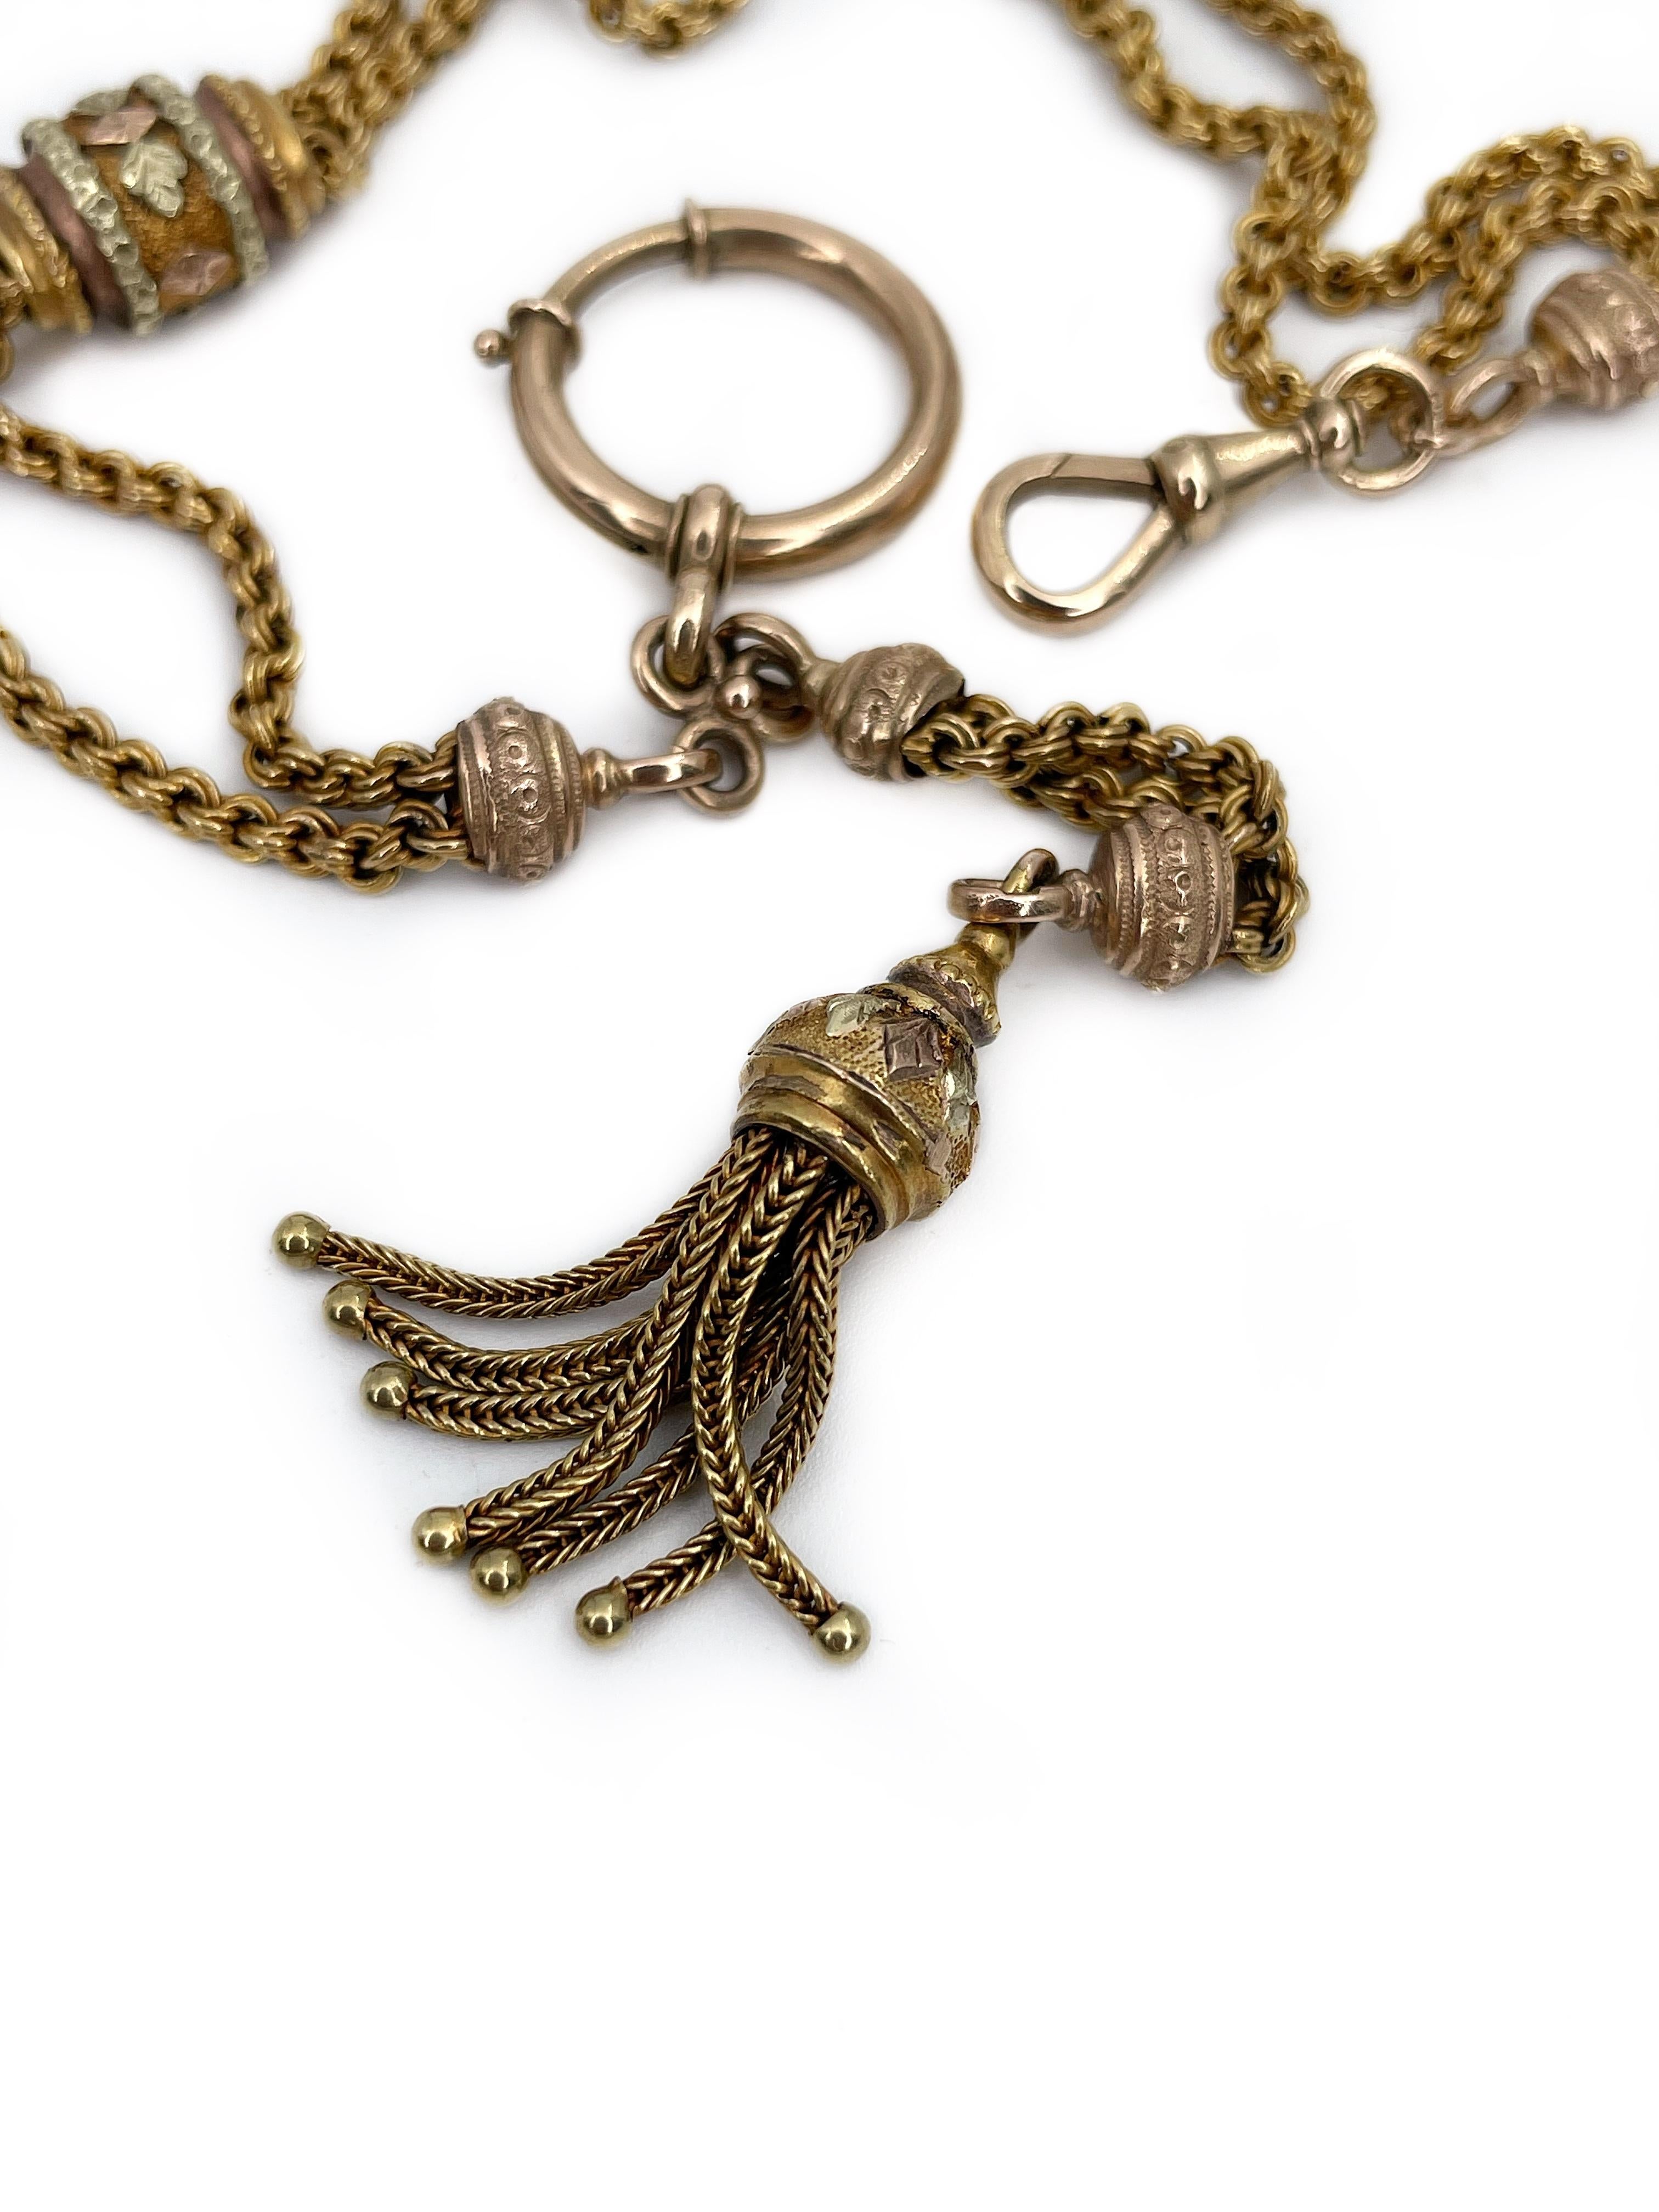 This is a lovely Albertina watch chain crafted in 15K rose and yellow gold. The piece comes from Edwardian period. It is adorned with a floral design slider and a tassel. 

An antique Albertina - the watch chain named for Queen Victoria's husband.